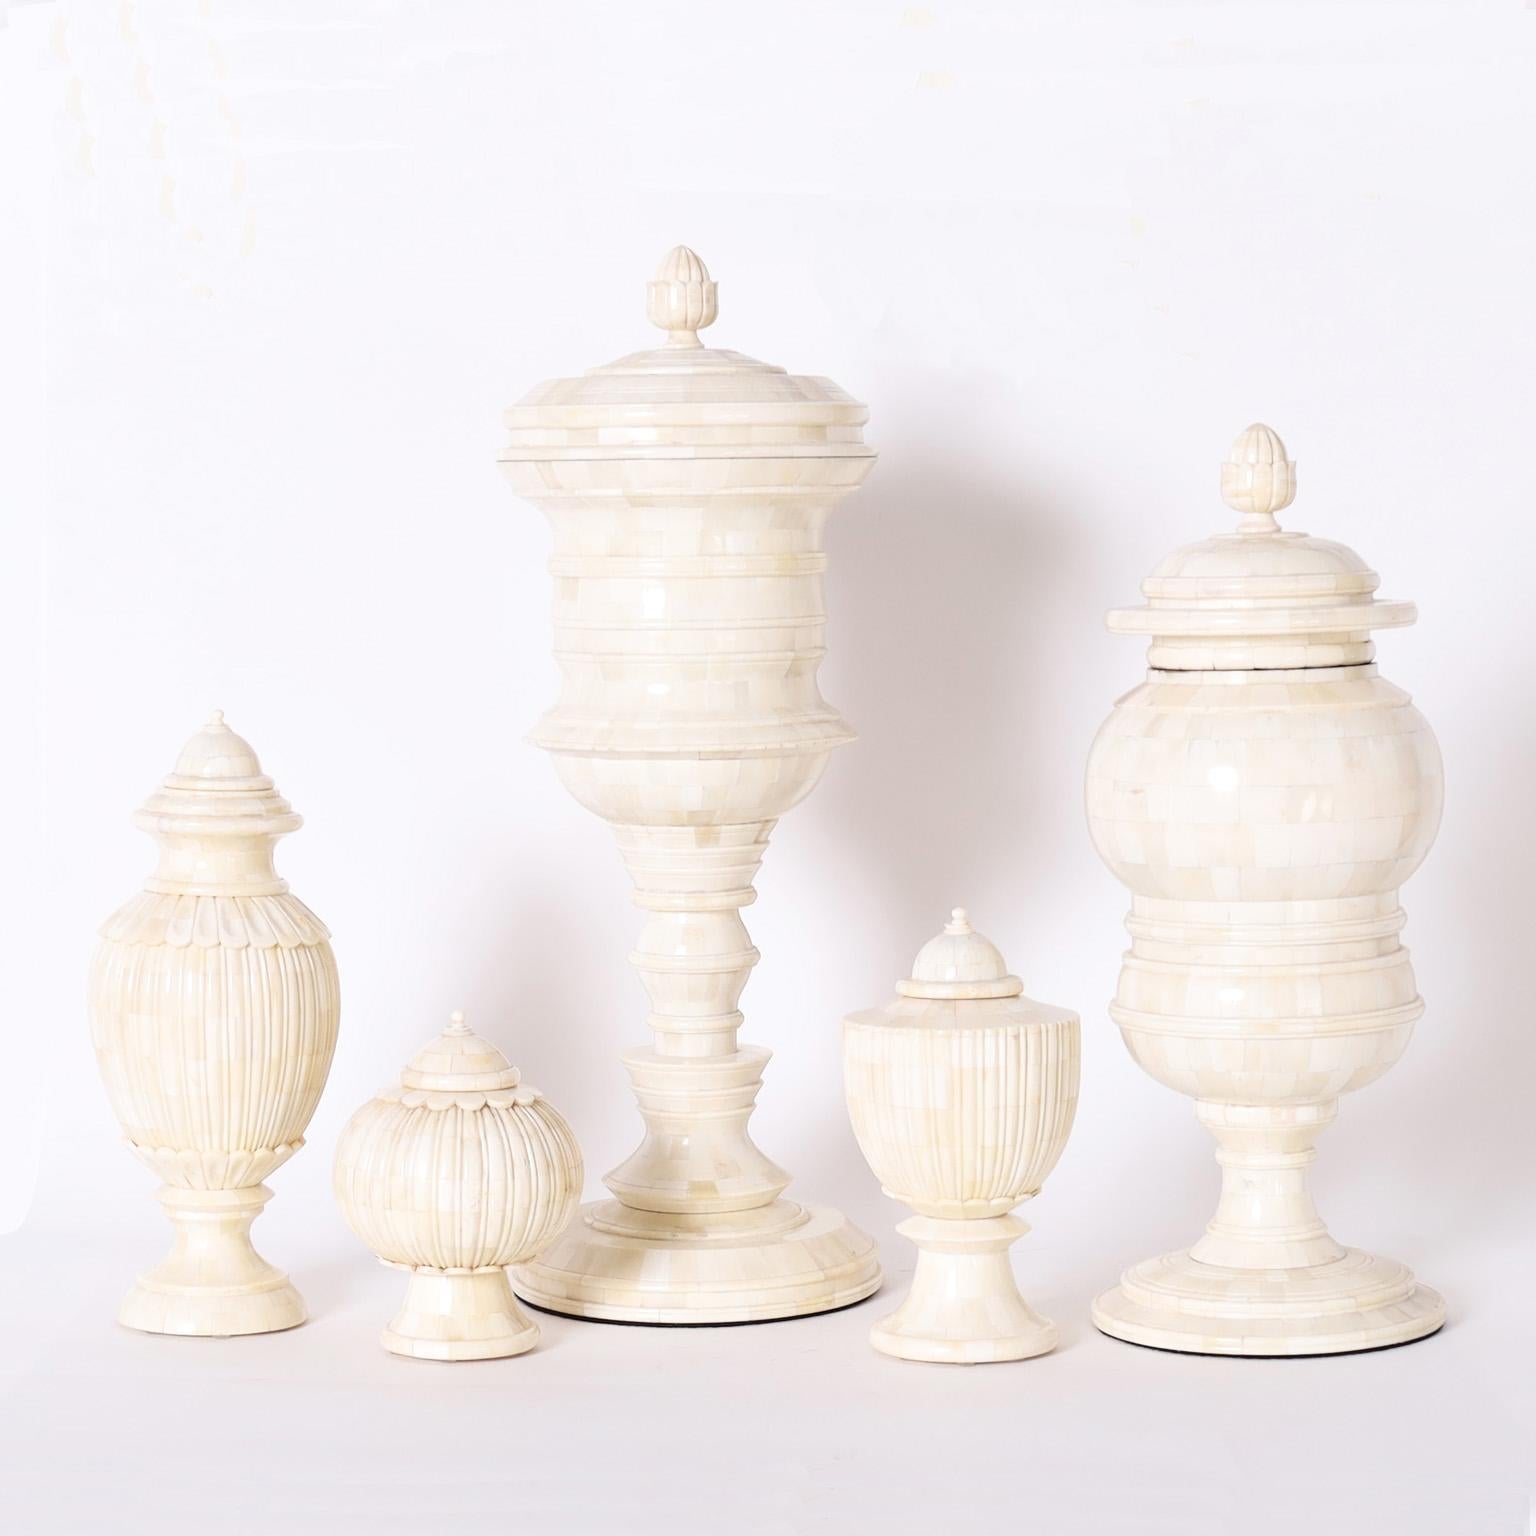 Impressive group of five British colonial style lidded urns all with their distinctive adaptations of classical form, crafted in turned and carved bone. Signed Tozai on the bottoms. Priced individually. 

H: 13 DM: 5 $850

H: 7 DM 5 $515

H: